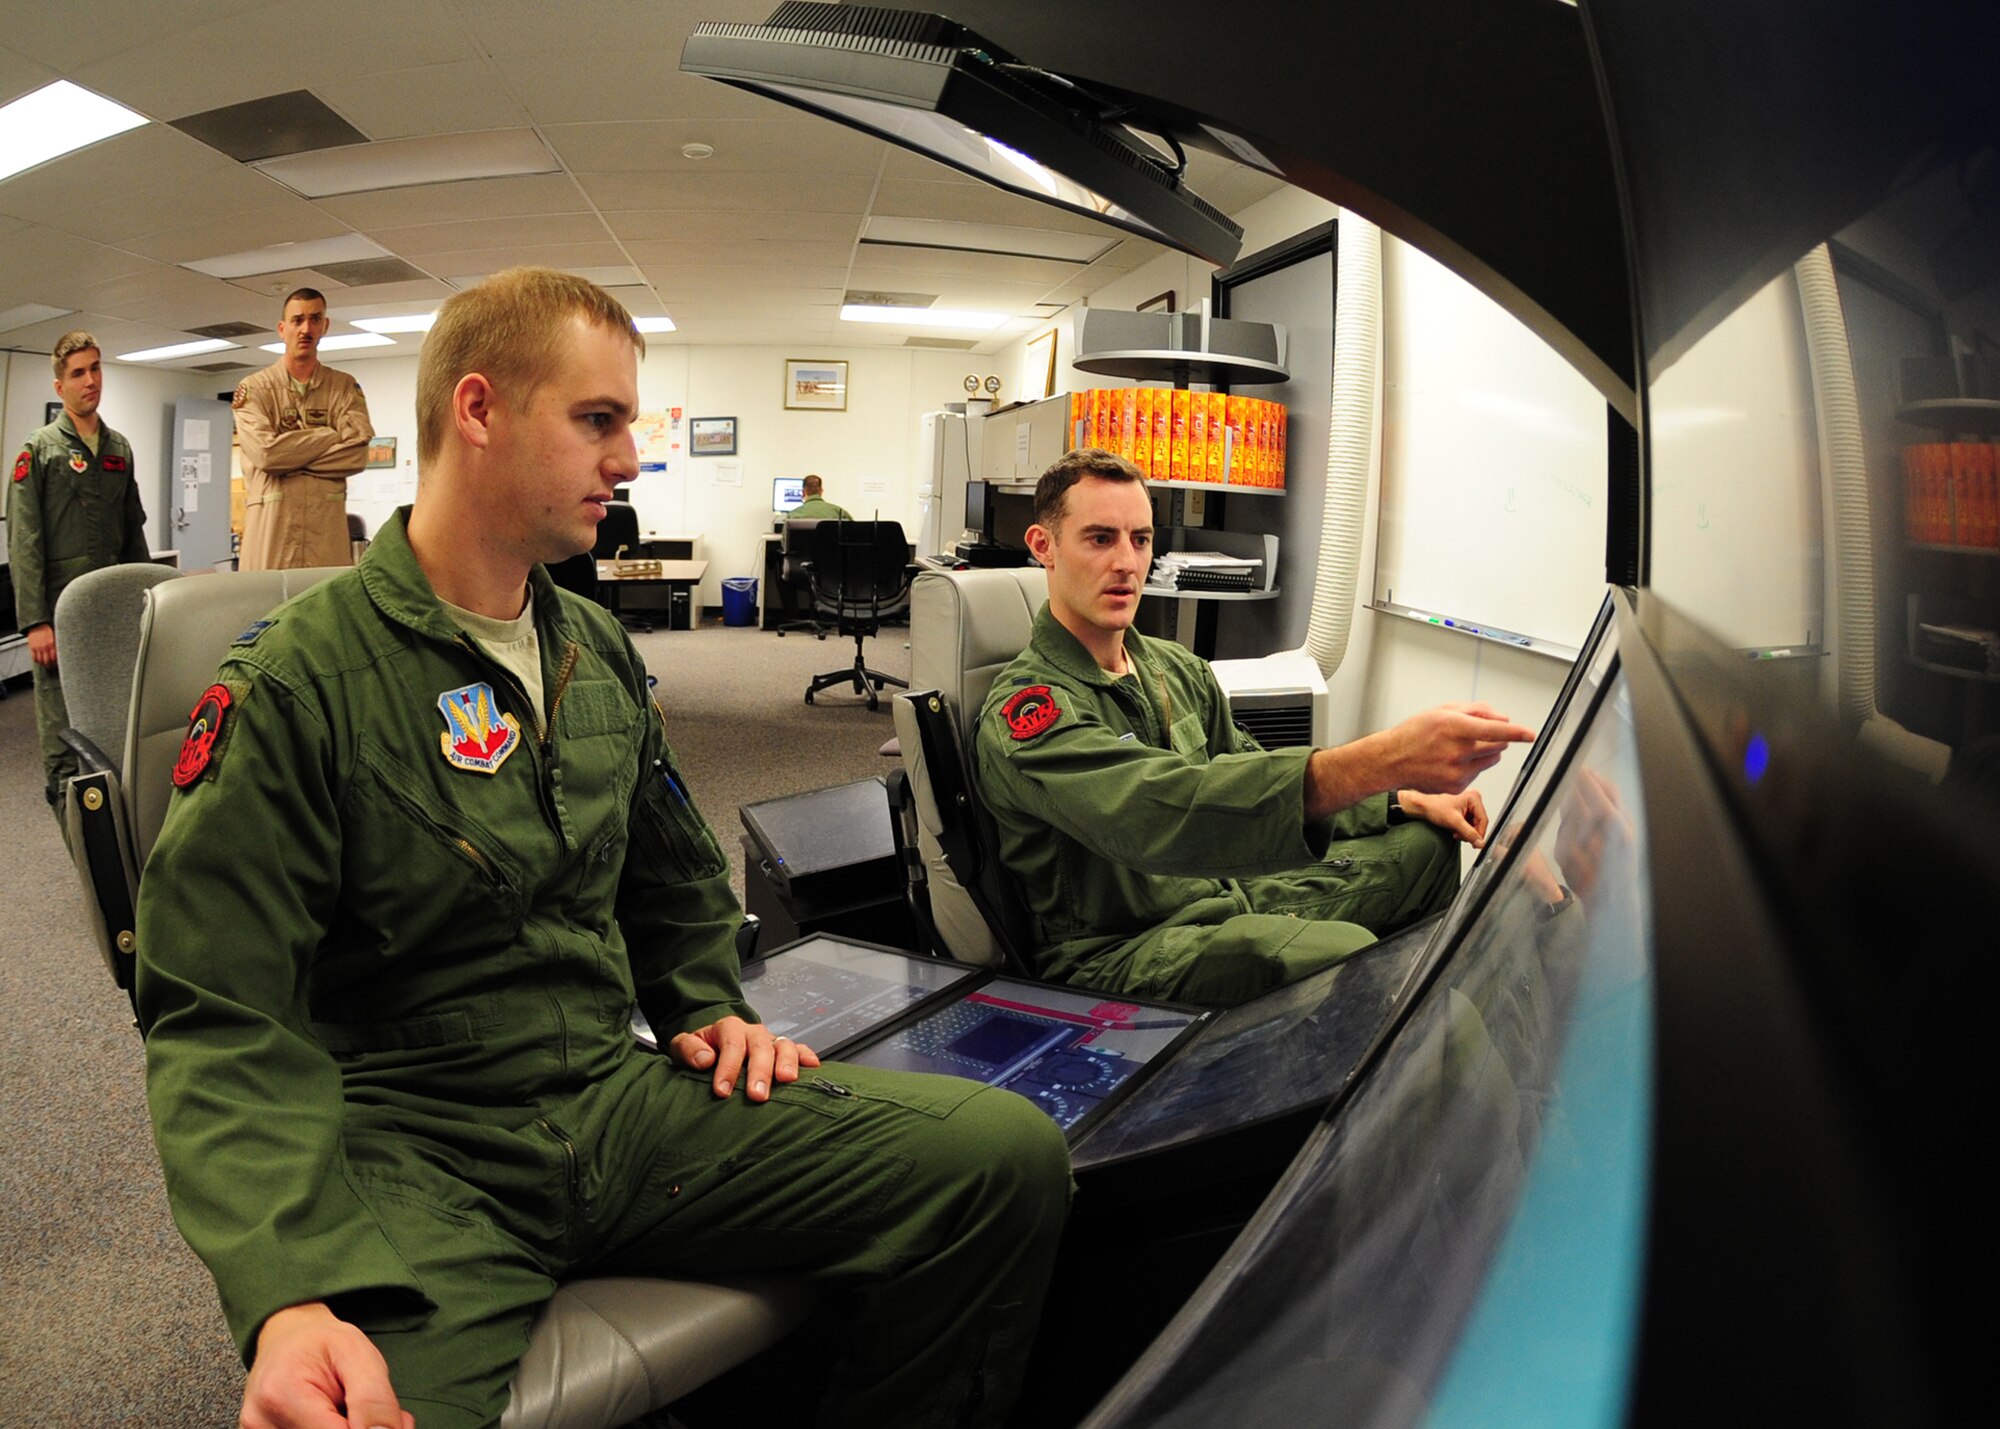 Two pilots use a flight simulator to become familiar with an Air Force MC-12W Liberty intelligence, surveillance, and reconnaissance aircraft at the 489th Reconnaissance Squadron Beale Air Force Base, Calif., Oct. 9, 2012. After training with the 489th RS, the pilots will become part of the operations unit associated with the MC-12W, the 427th RS. (U.S. Air Force photo by Senior Airman Shawn Nickel/Released)